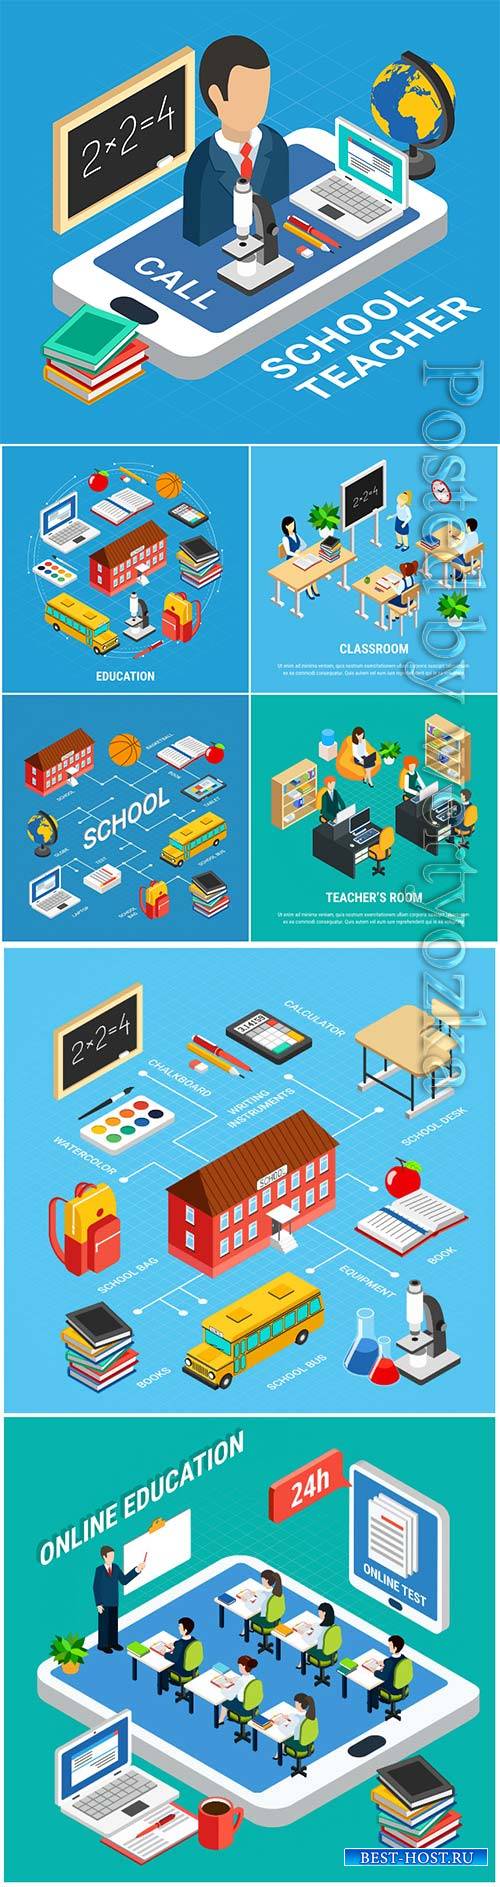 Isometric education illustration with school teacher and devices